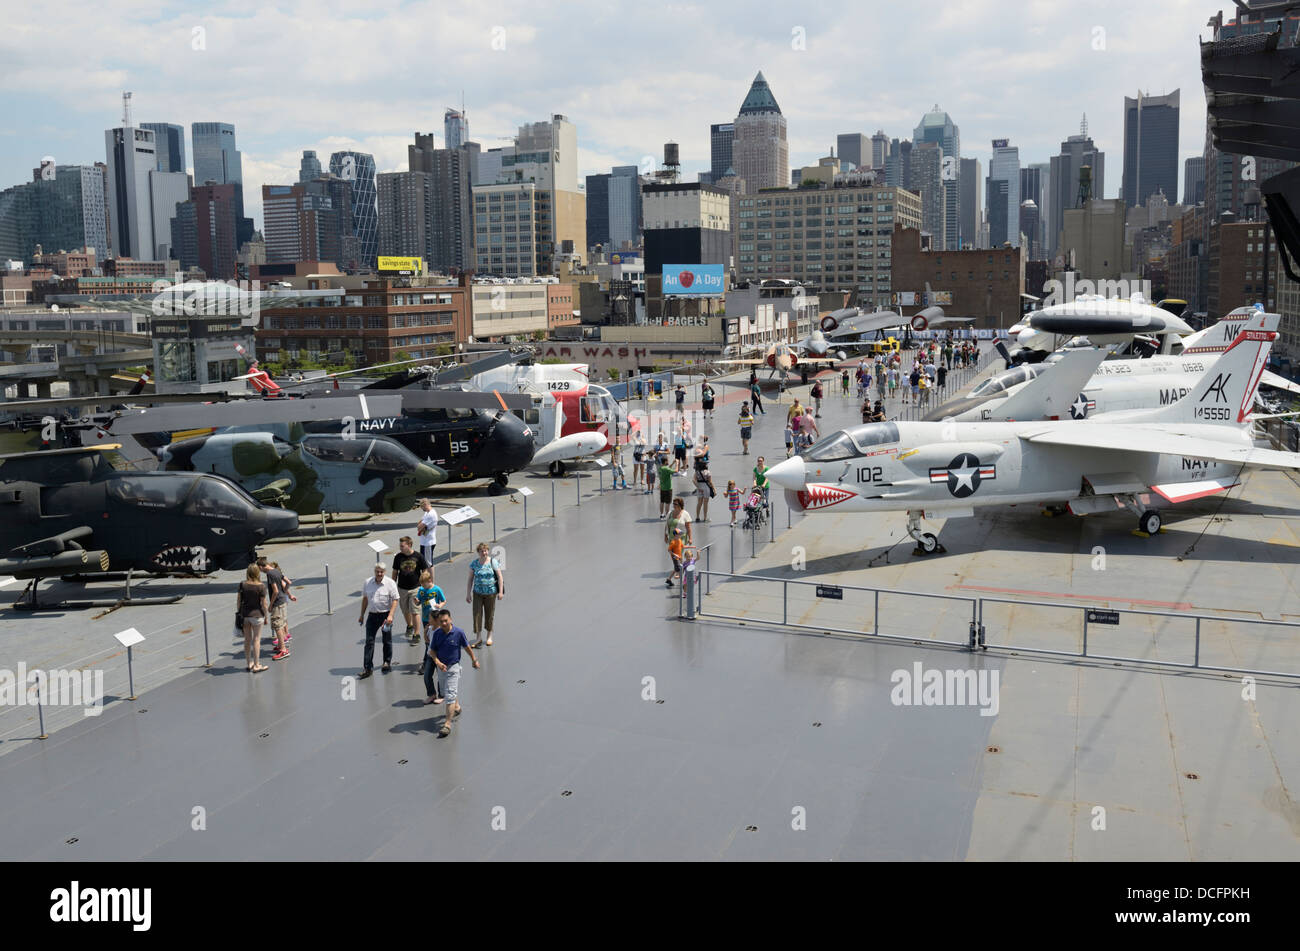 Tourists walking the deck of the Intrepid aircraft carrier, Intrepid Sea, Air and Space Museum, NY Stock Photo